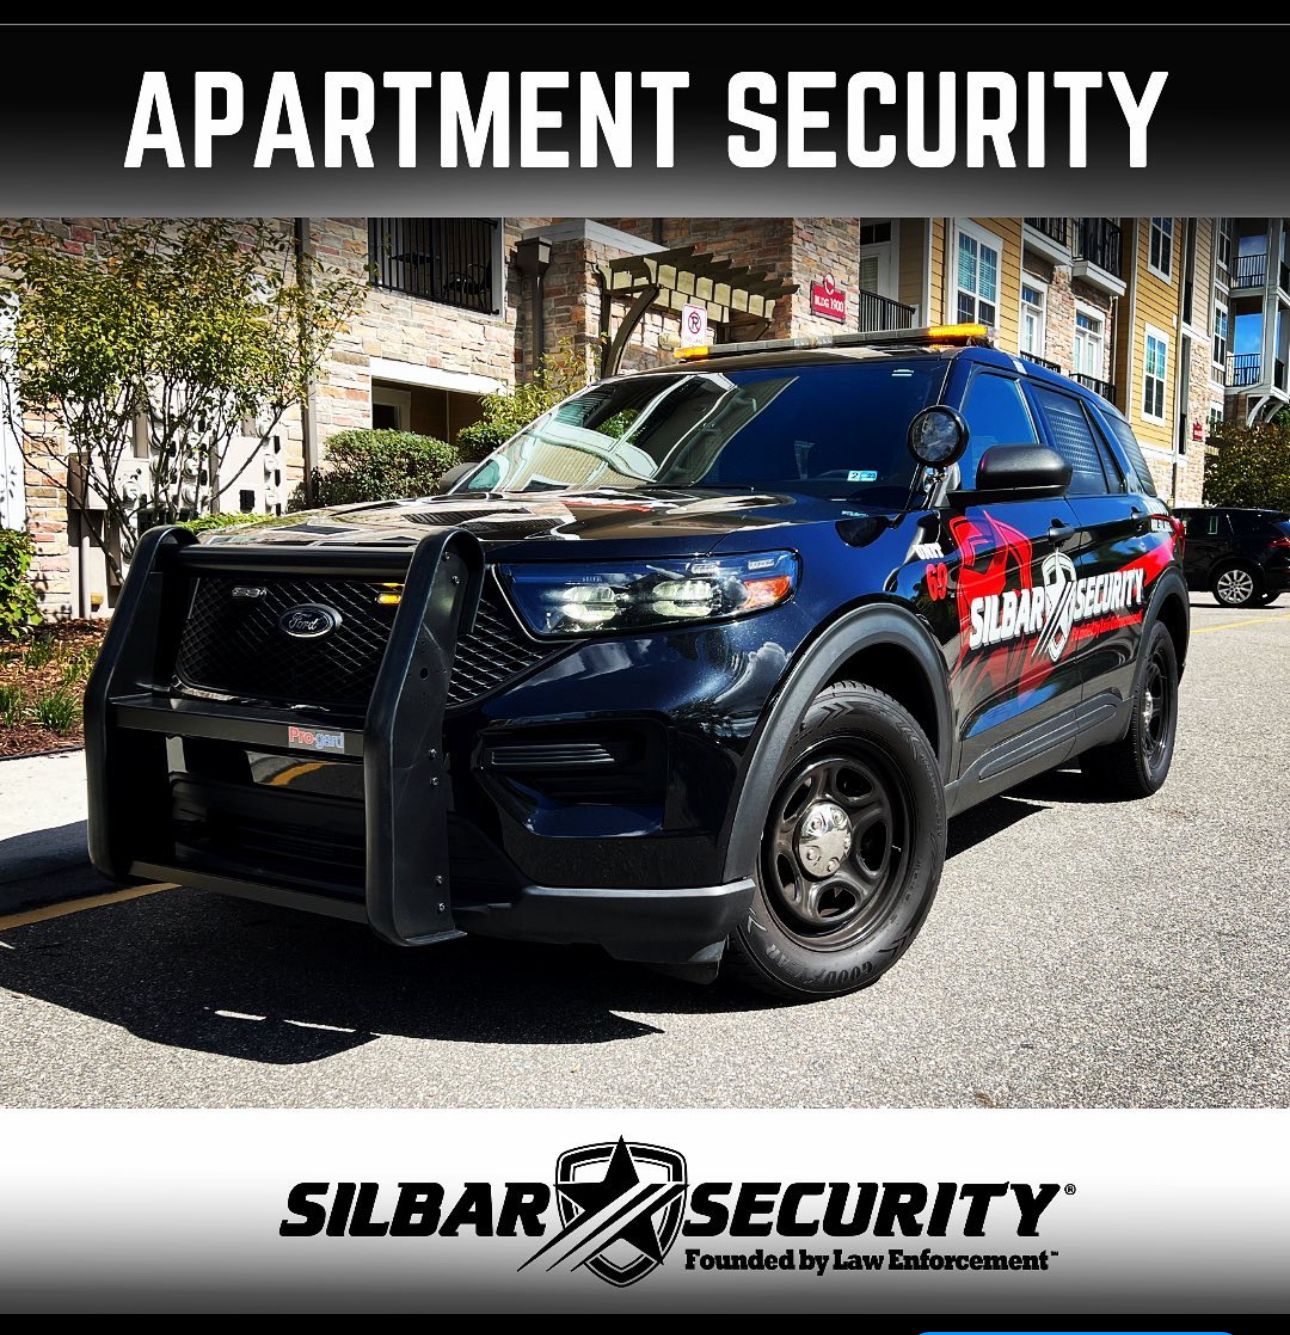 Silbar Security Franchise Opportunity